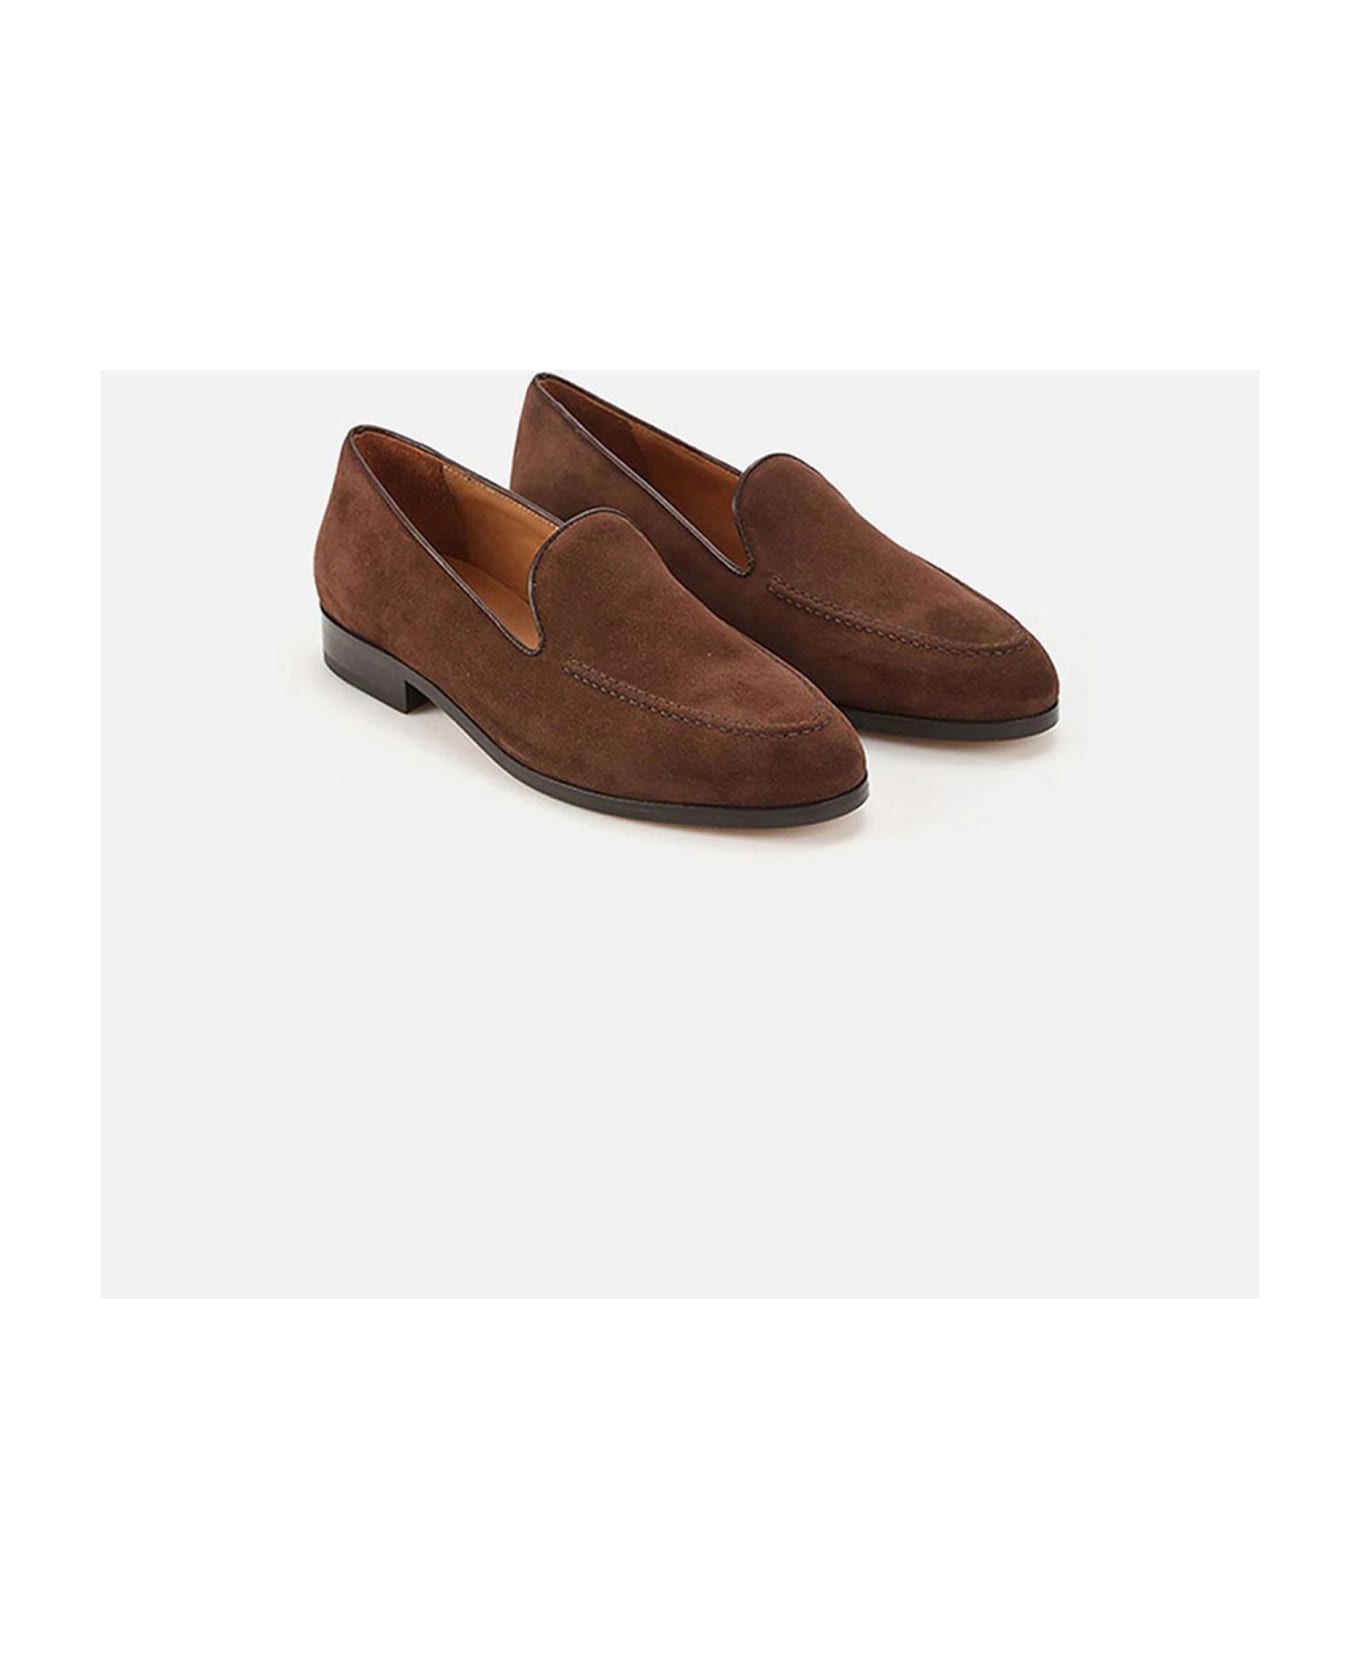 CB Made in Italy Suede Slip-on Dove - Chocolate